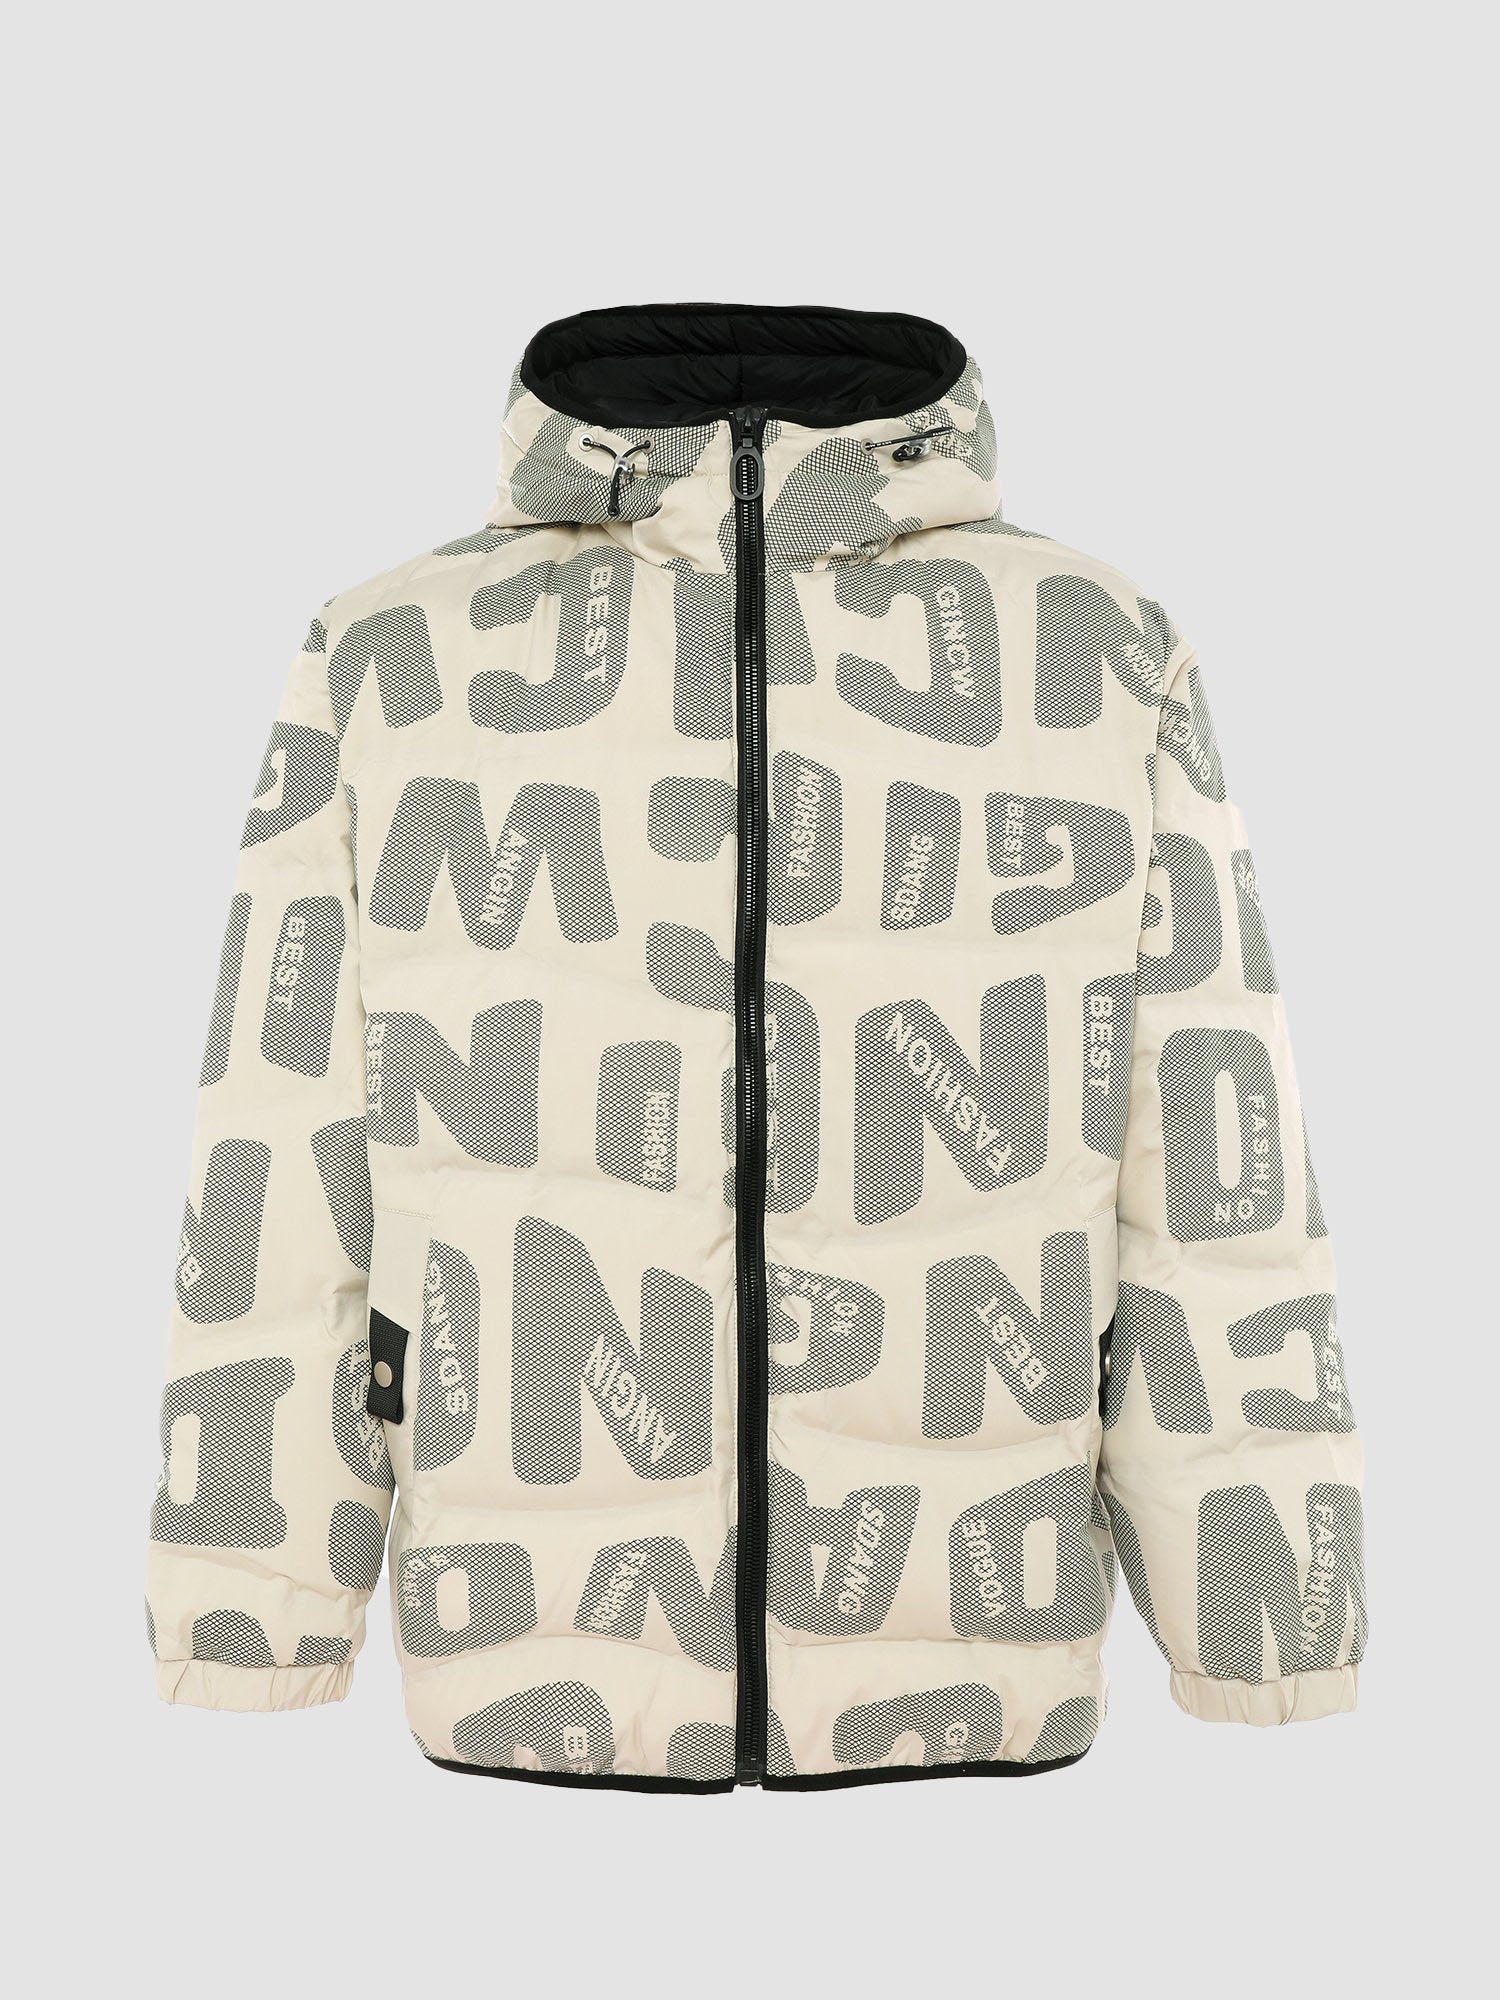 JUSTNOTAG Letter Print 90% White Duck Down Down Coat 12.03